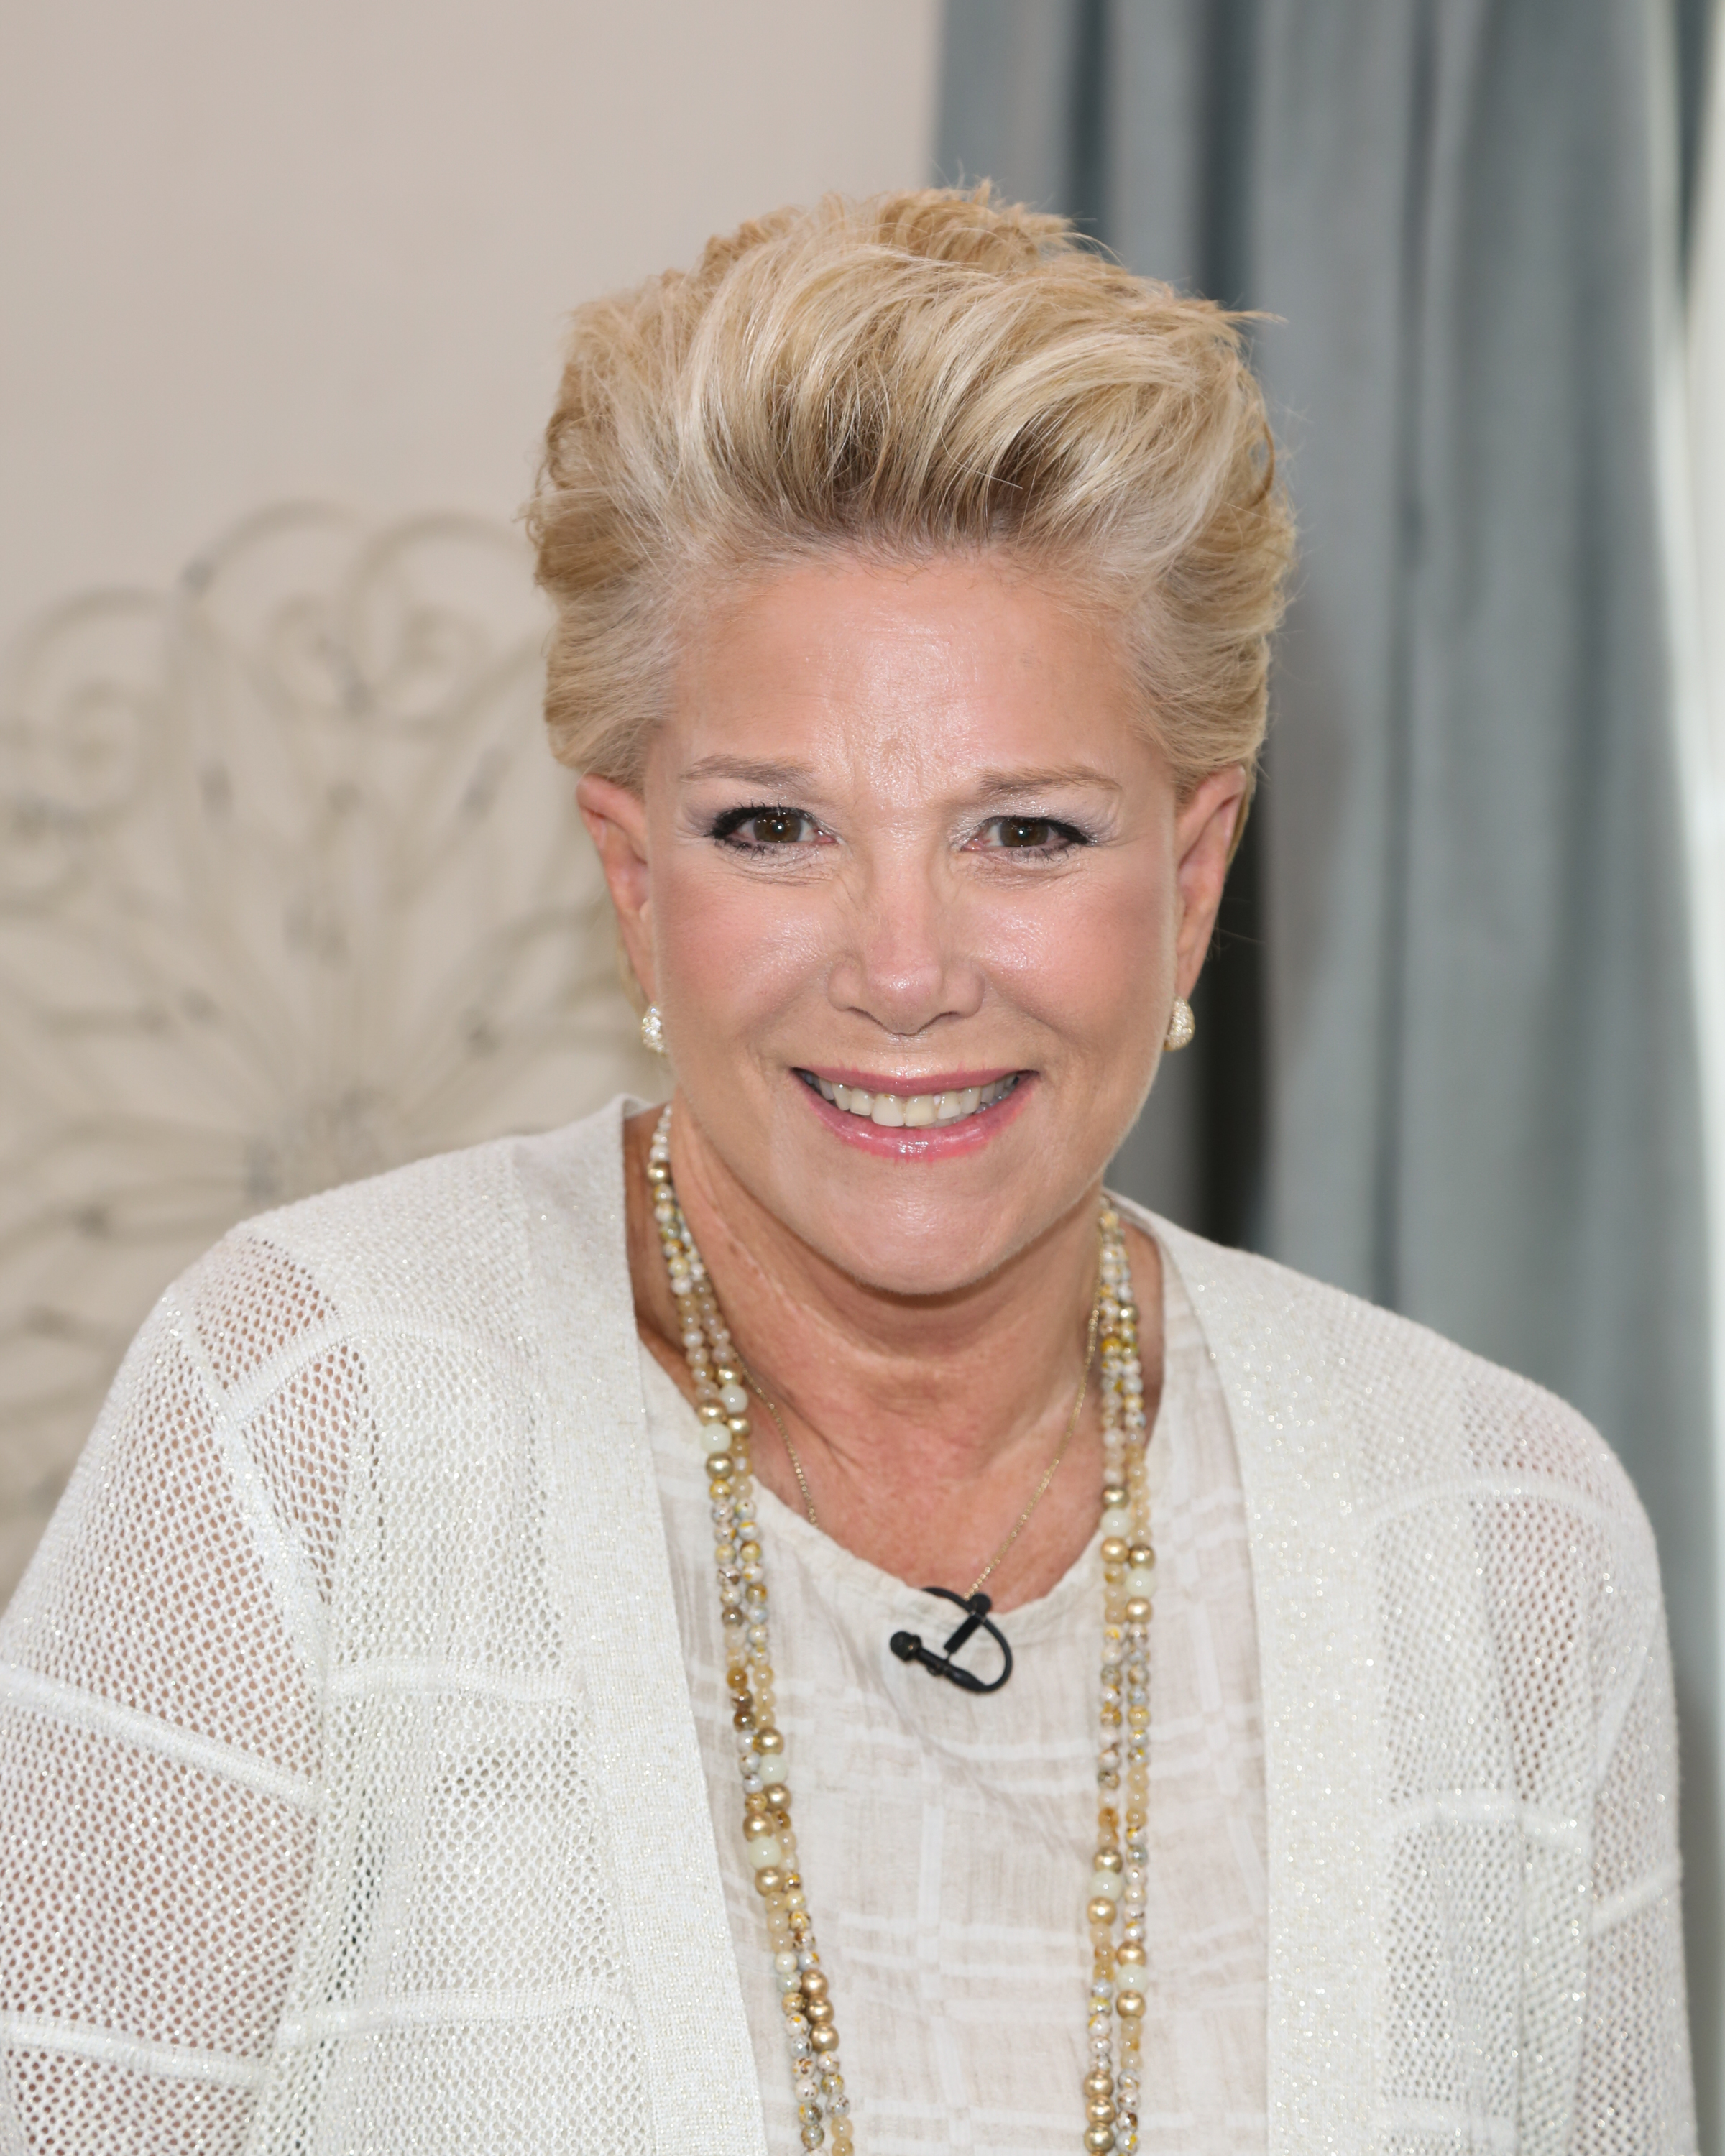 Joan Lunden visit Hallmark's "Home & Family" at Universal Studios Hollywood in Universal City, California on May 23, 2018. | Source: Getty Images